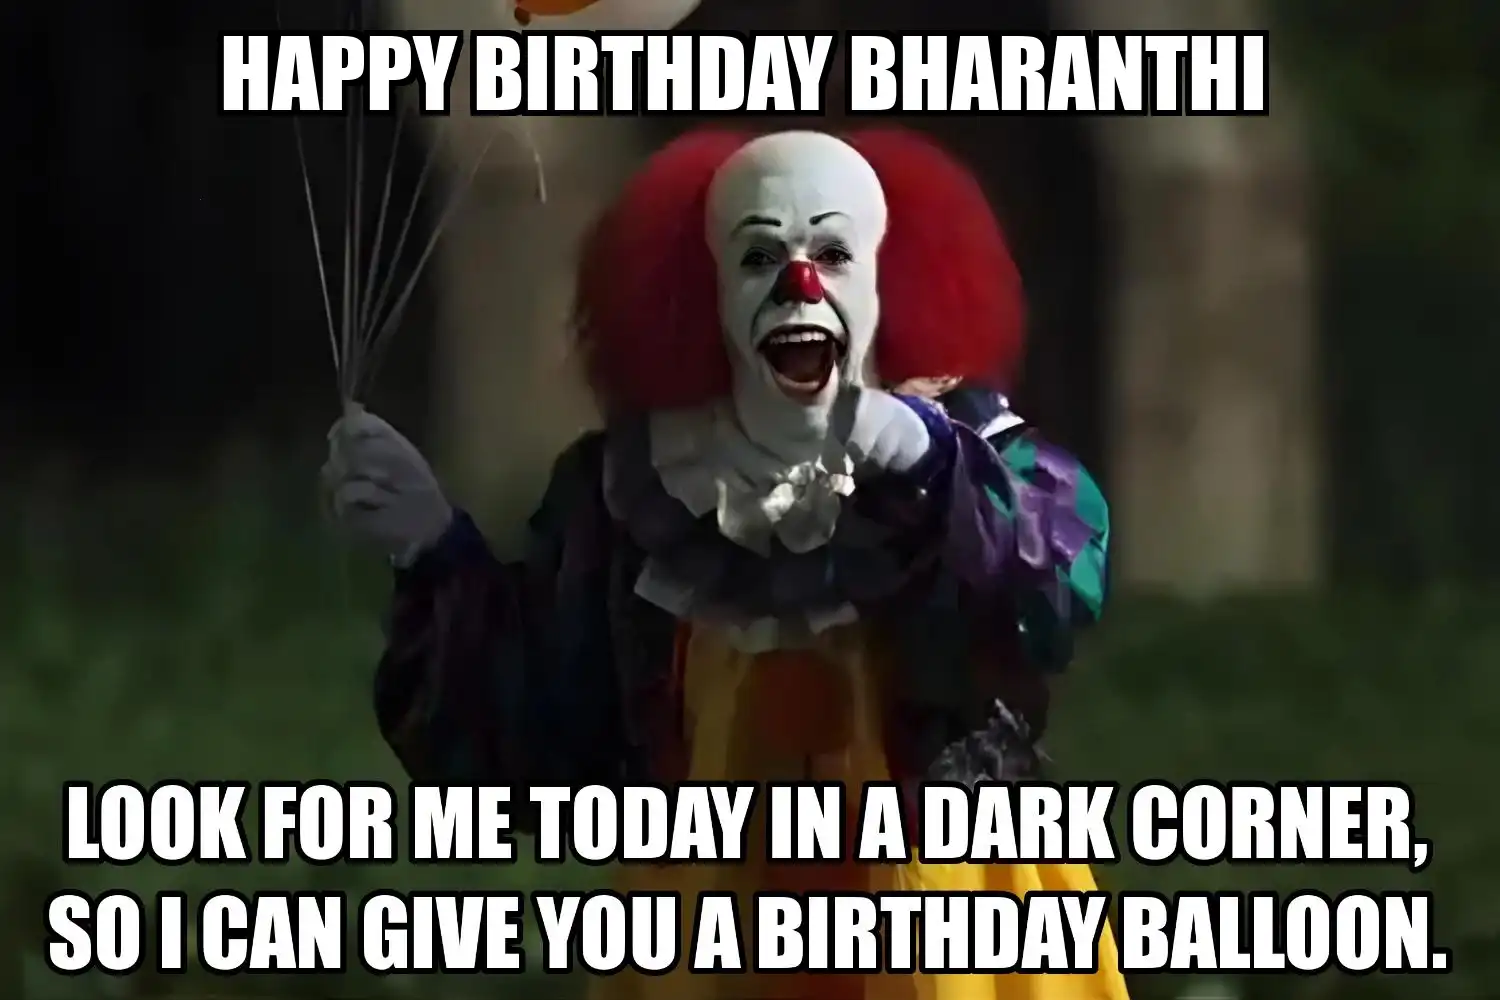 Happy Birthday Bharanthi I Can Give You A Balloon Meme